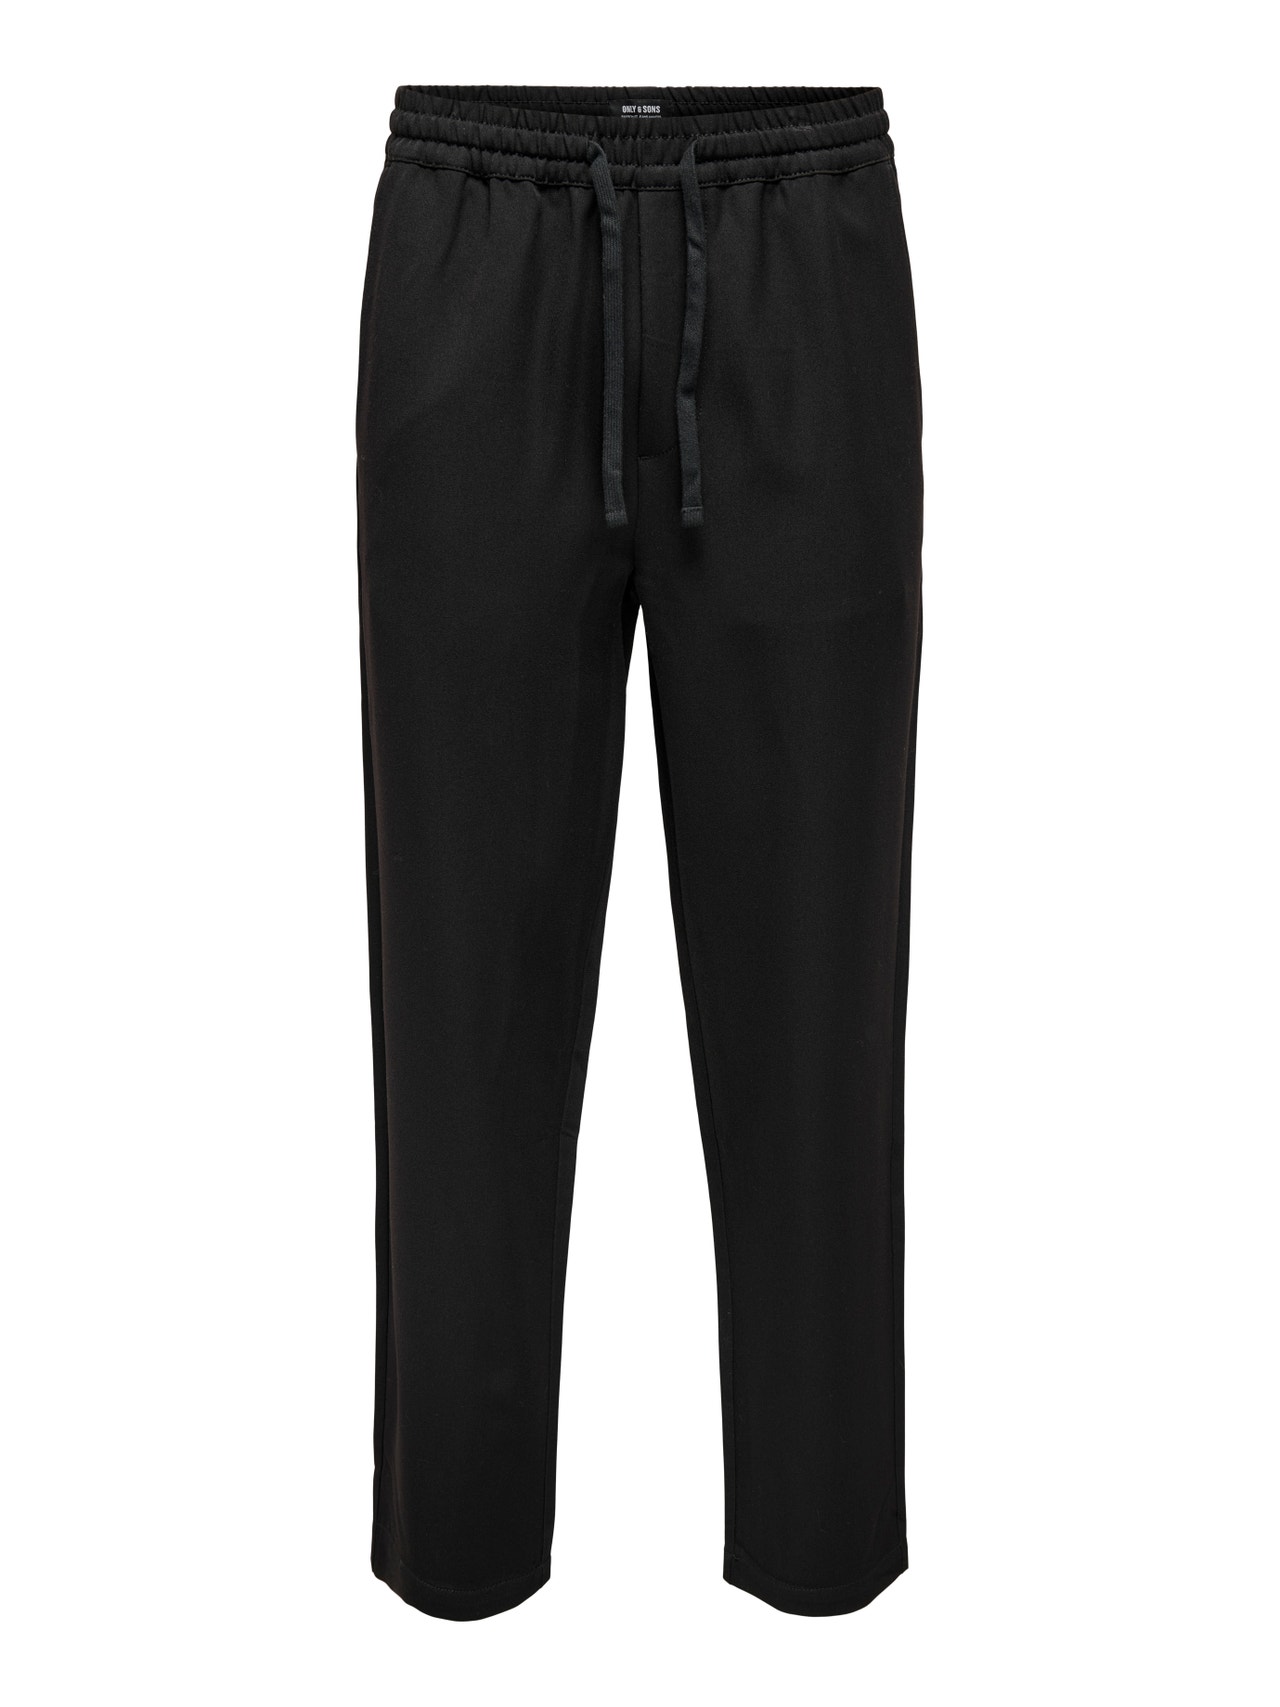 ONLY & SONS Solid colored classic pants -Black - 22025664